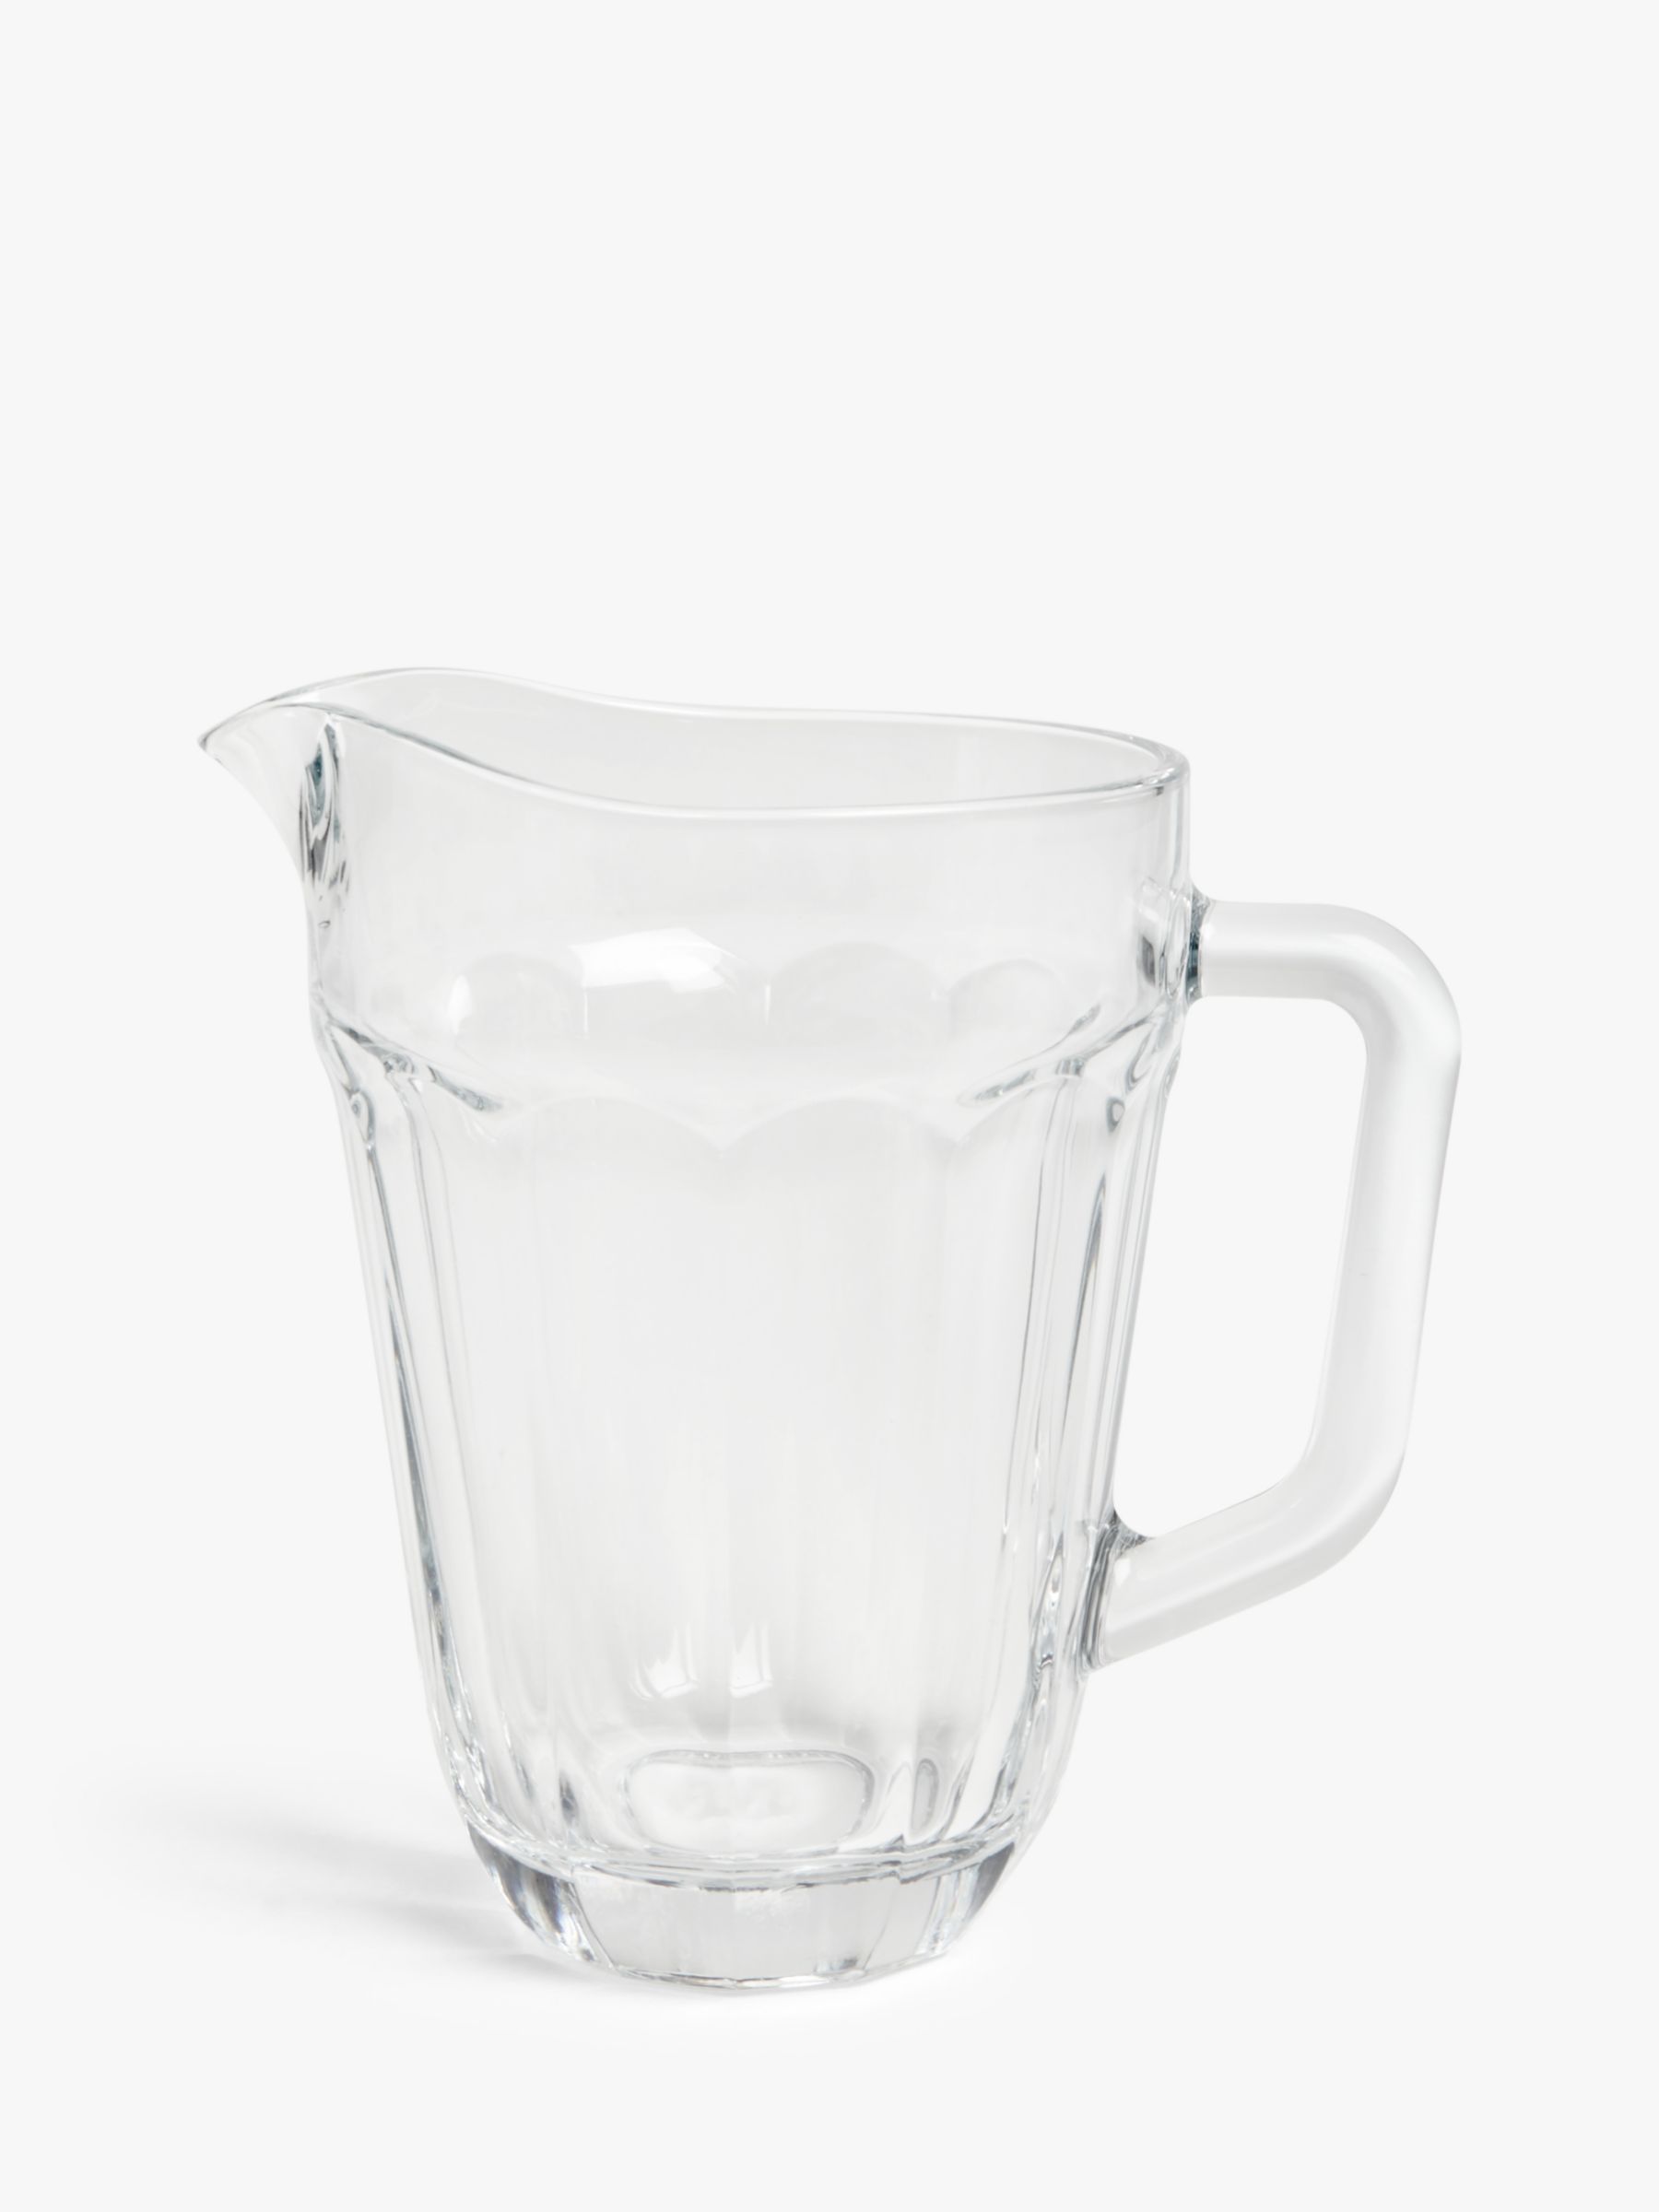 ANYDAY John Lewis & Partners Drink Glass Jug, 1.4L, Clear